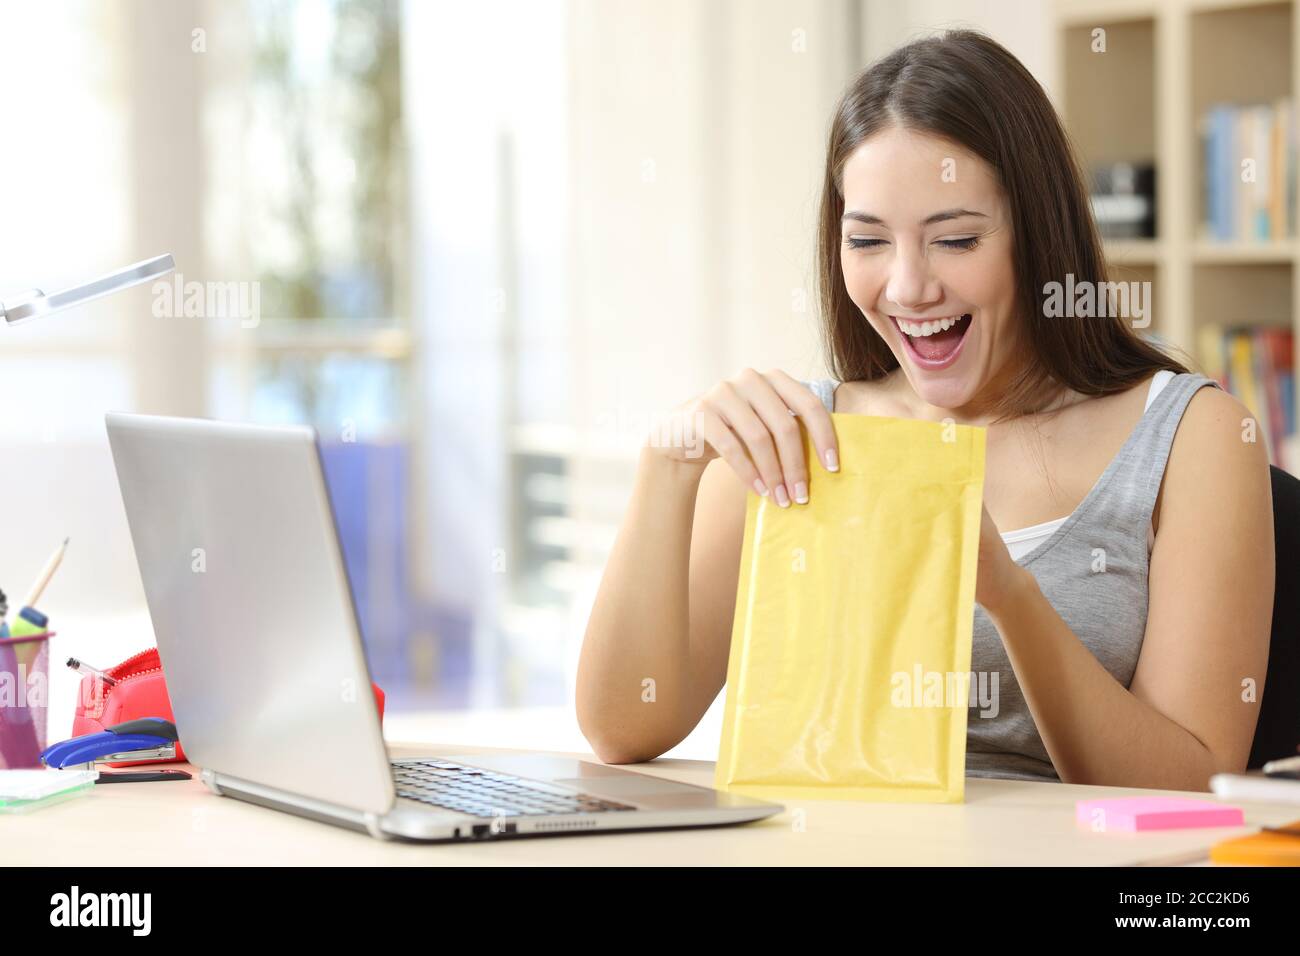 Excited student woman opening and looking inside a padded envelope sitting on a desk at home Stock Photo